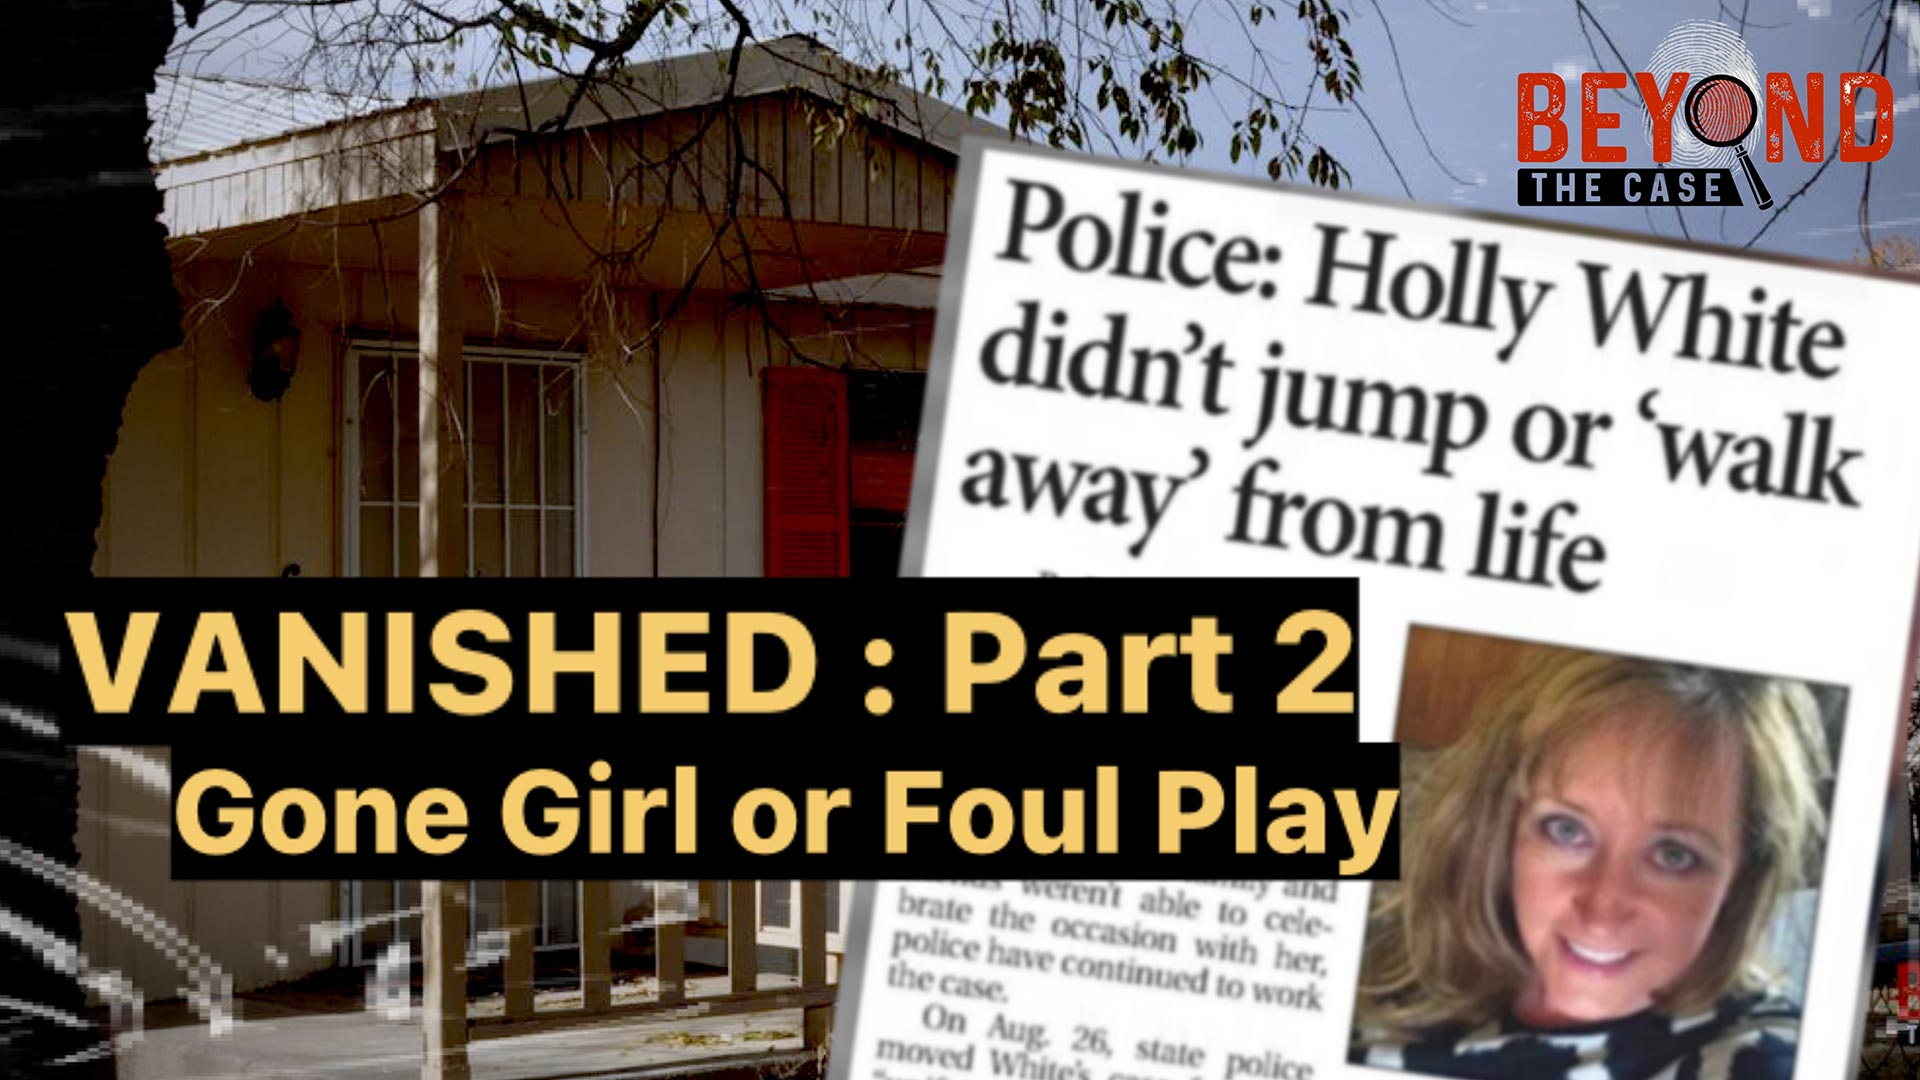 Gone Girl or Foul Play | The Search For Holly White - Part 2 Full Episode